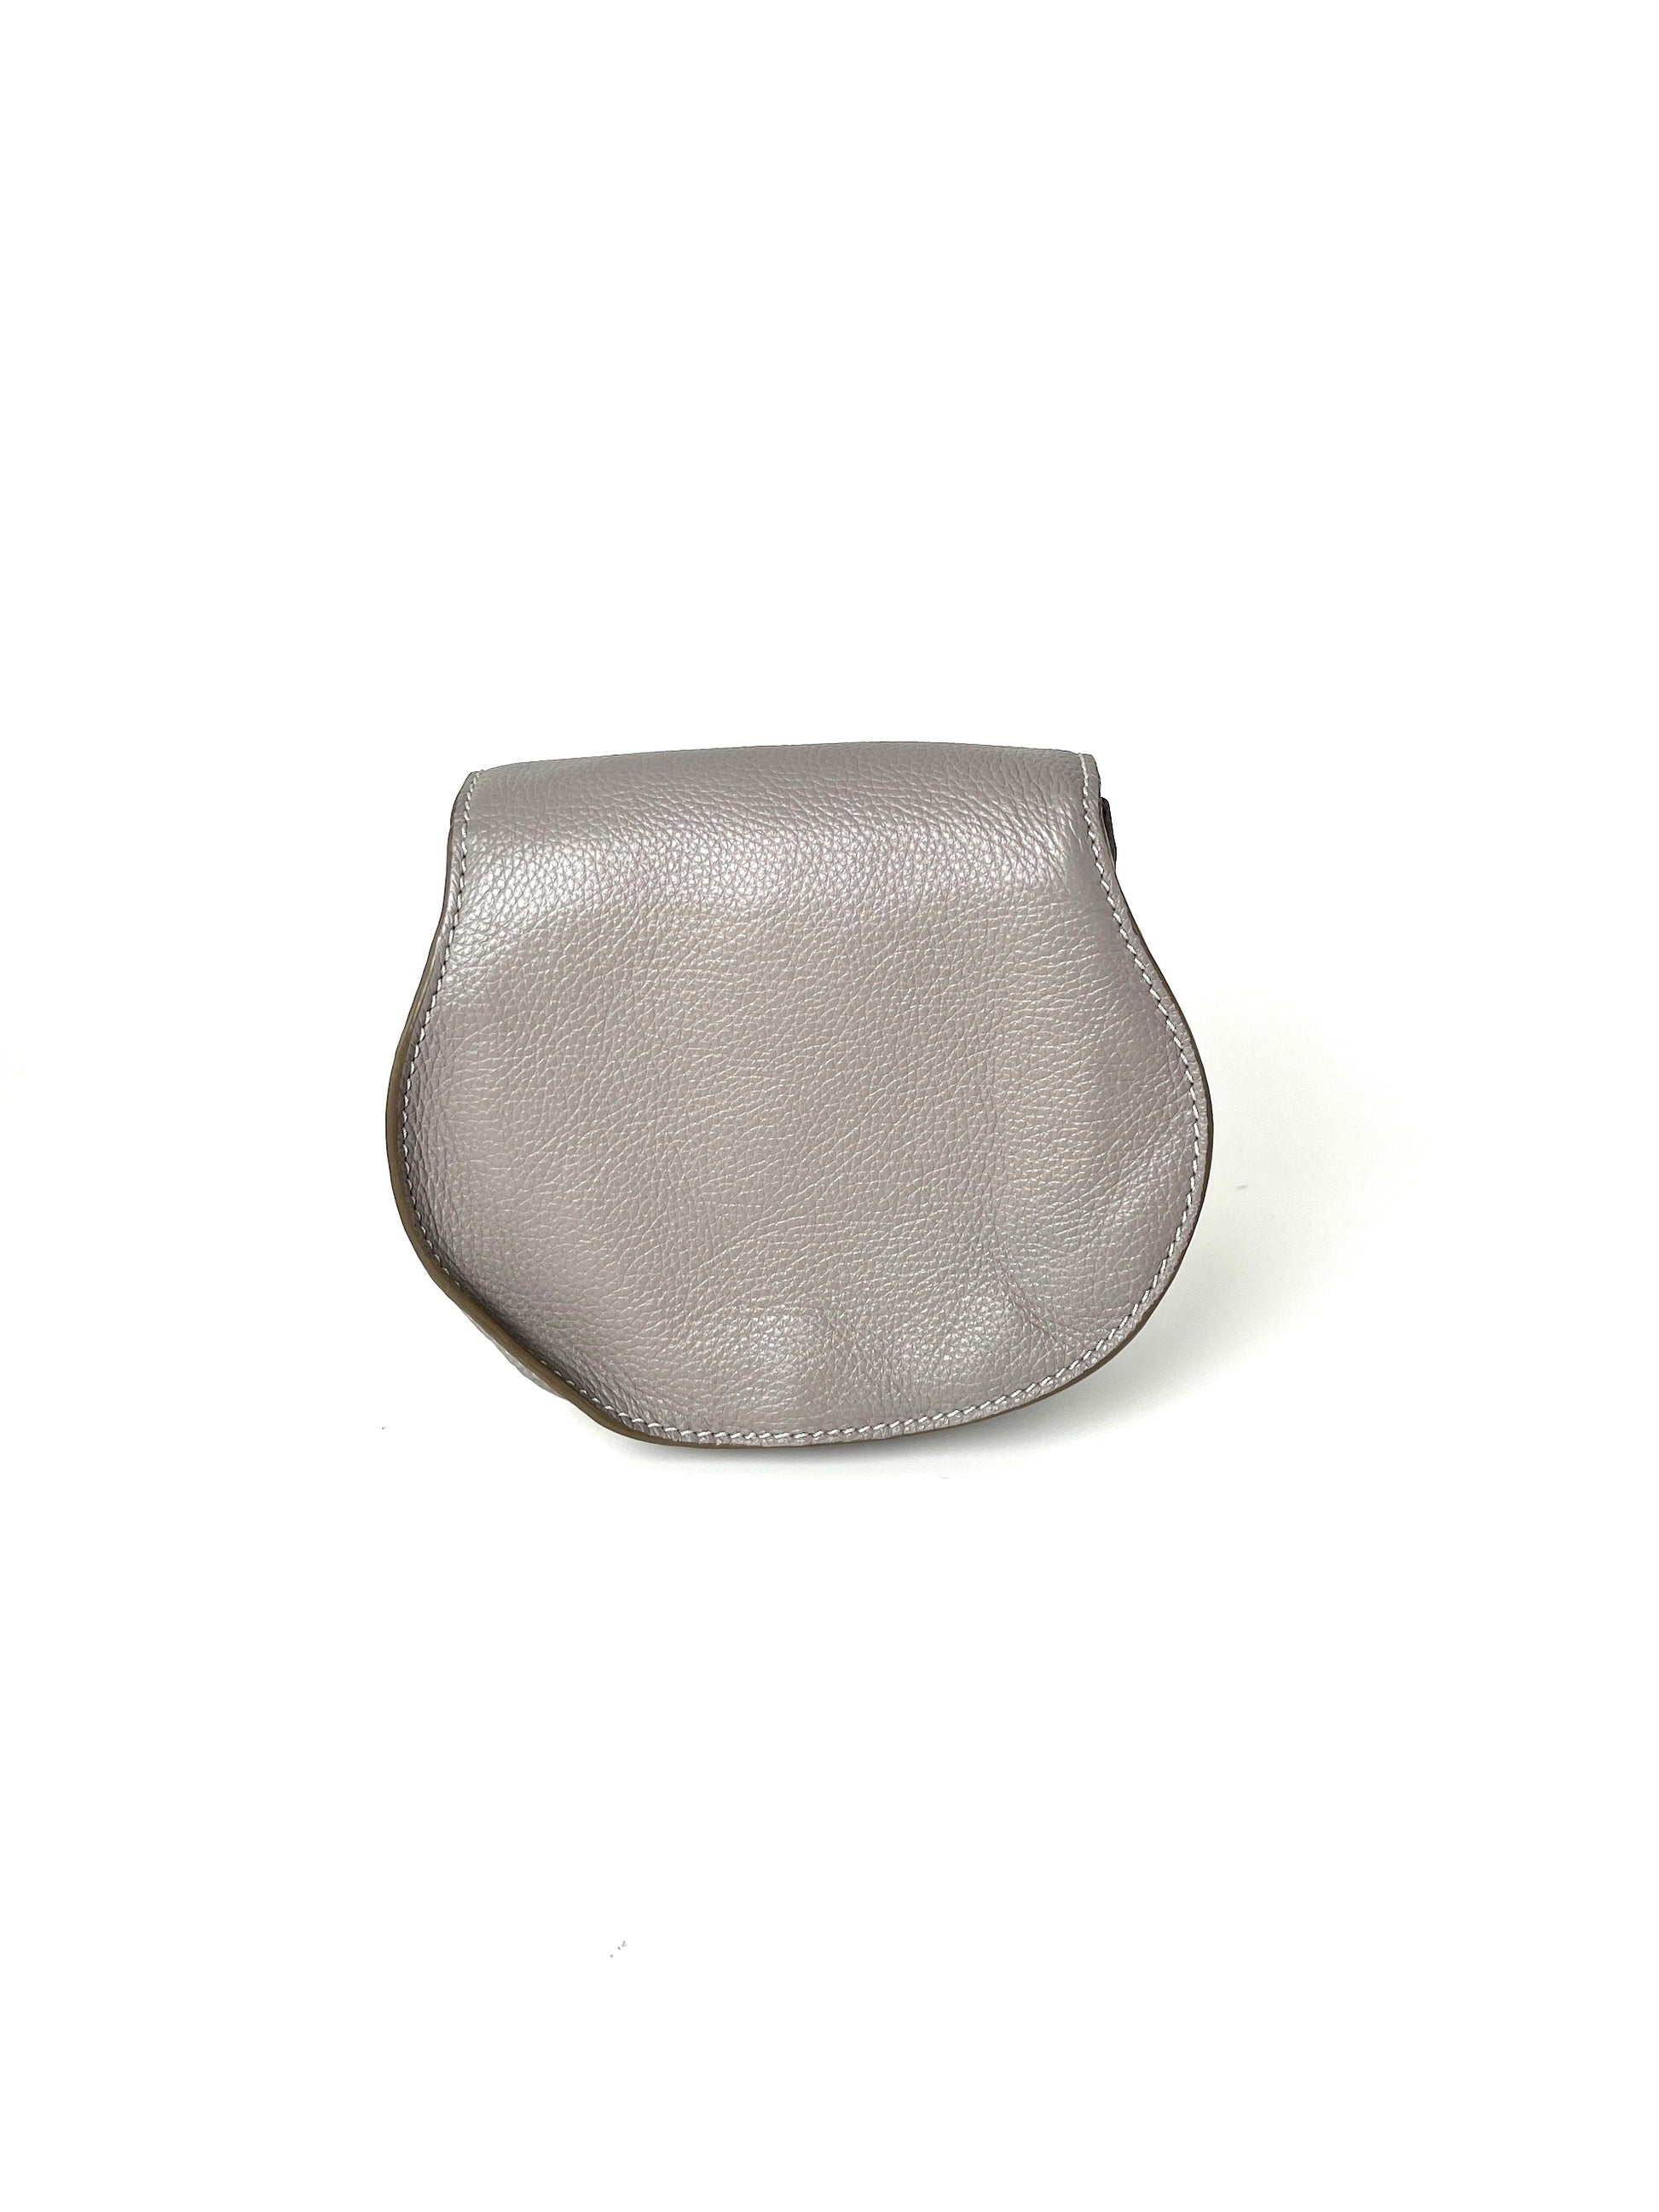 CHLOE Marcie Small Leather Gray Leather Saddle Bag